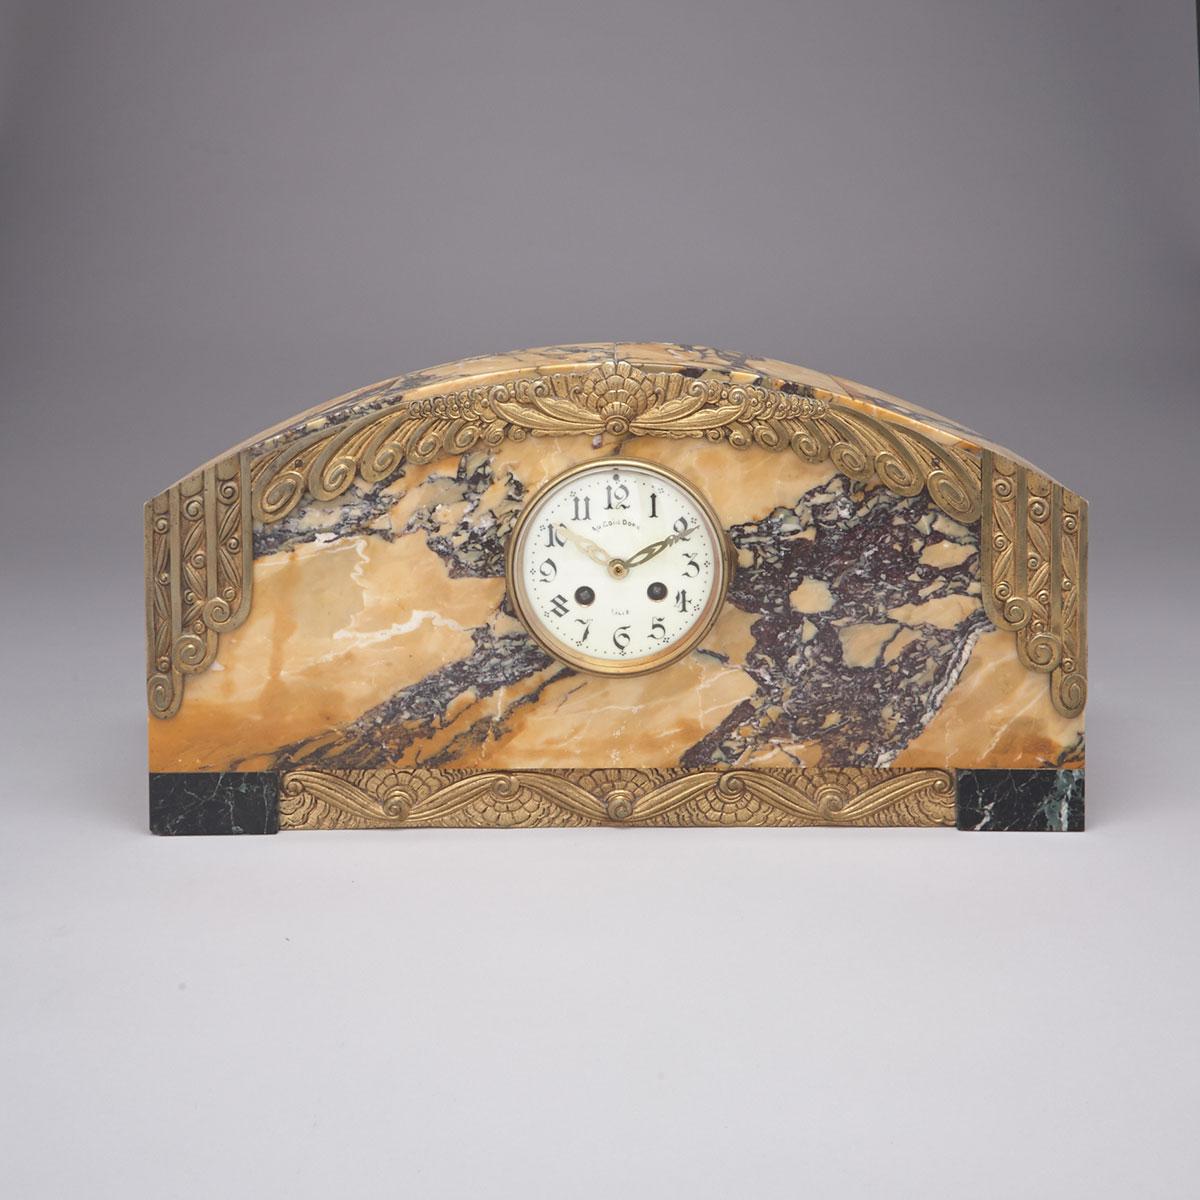 French Art Deco Gilt Bronze Mounted Sienna Marble Mantle Clock, c.1925